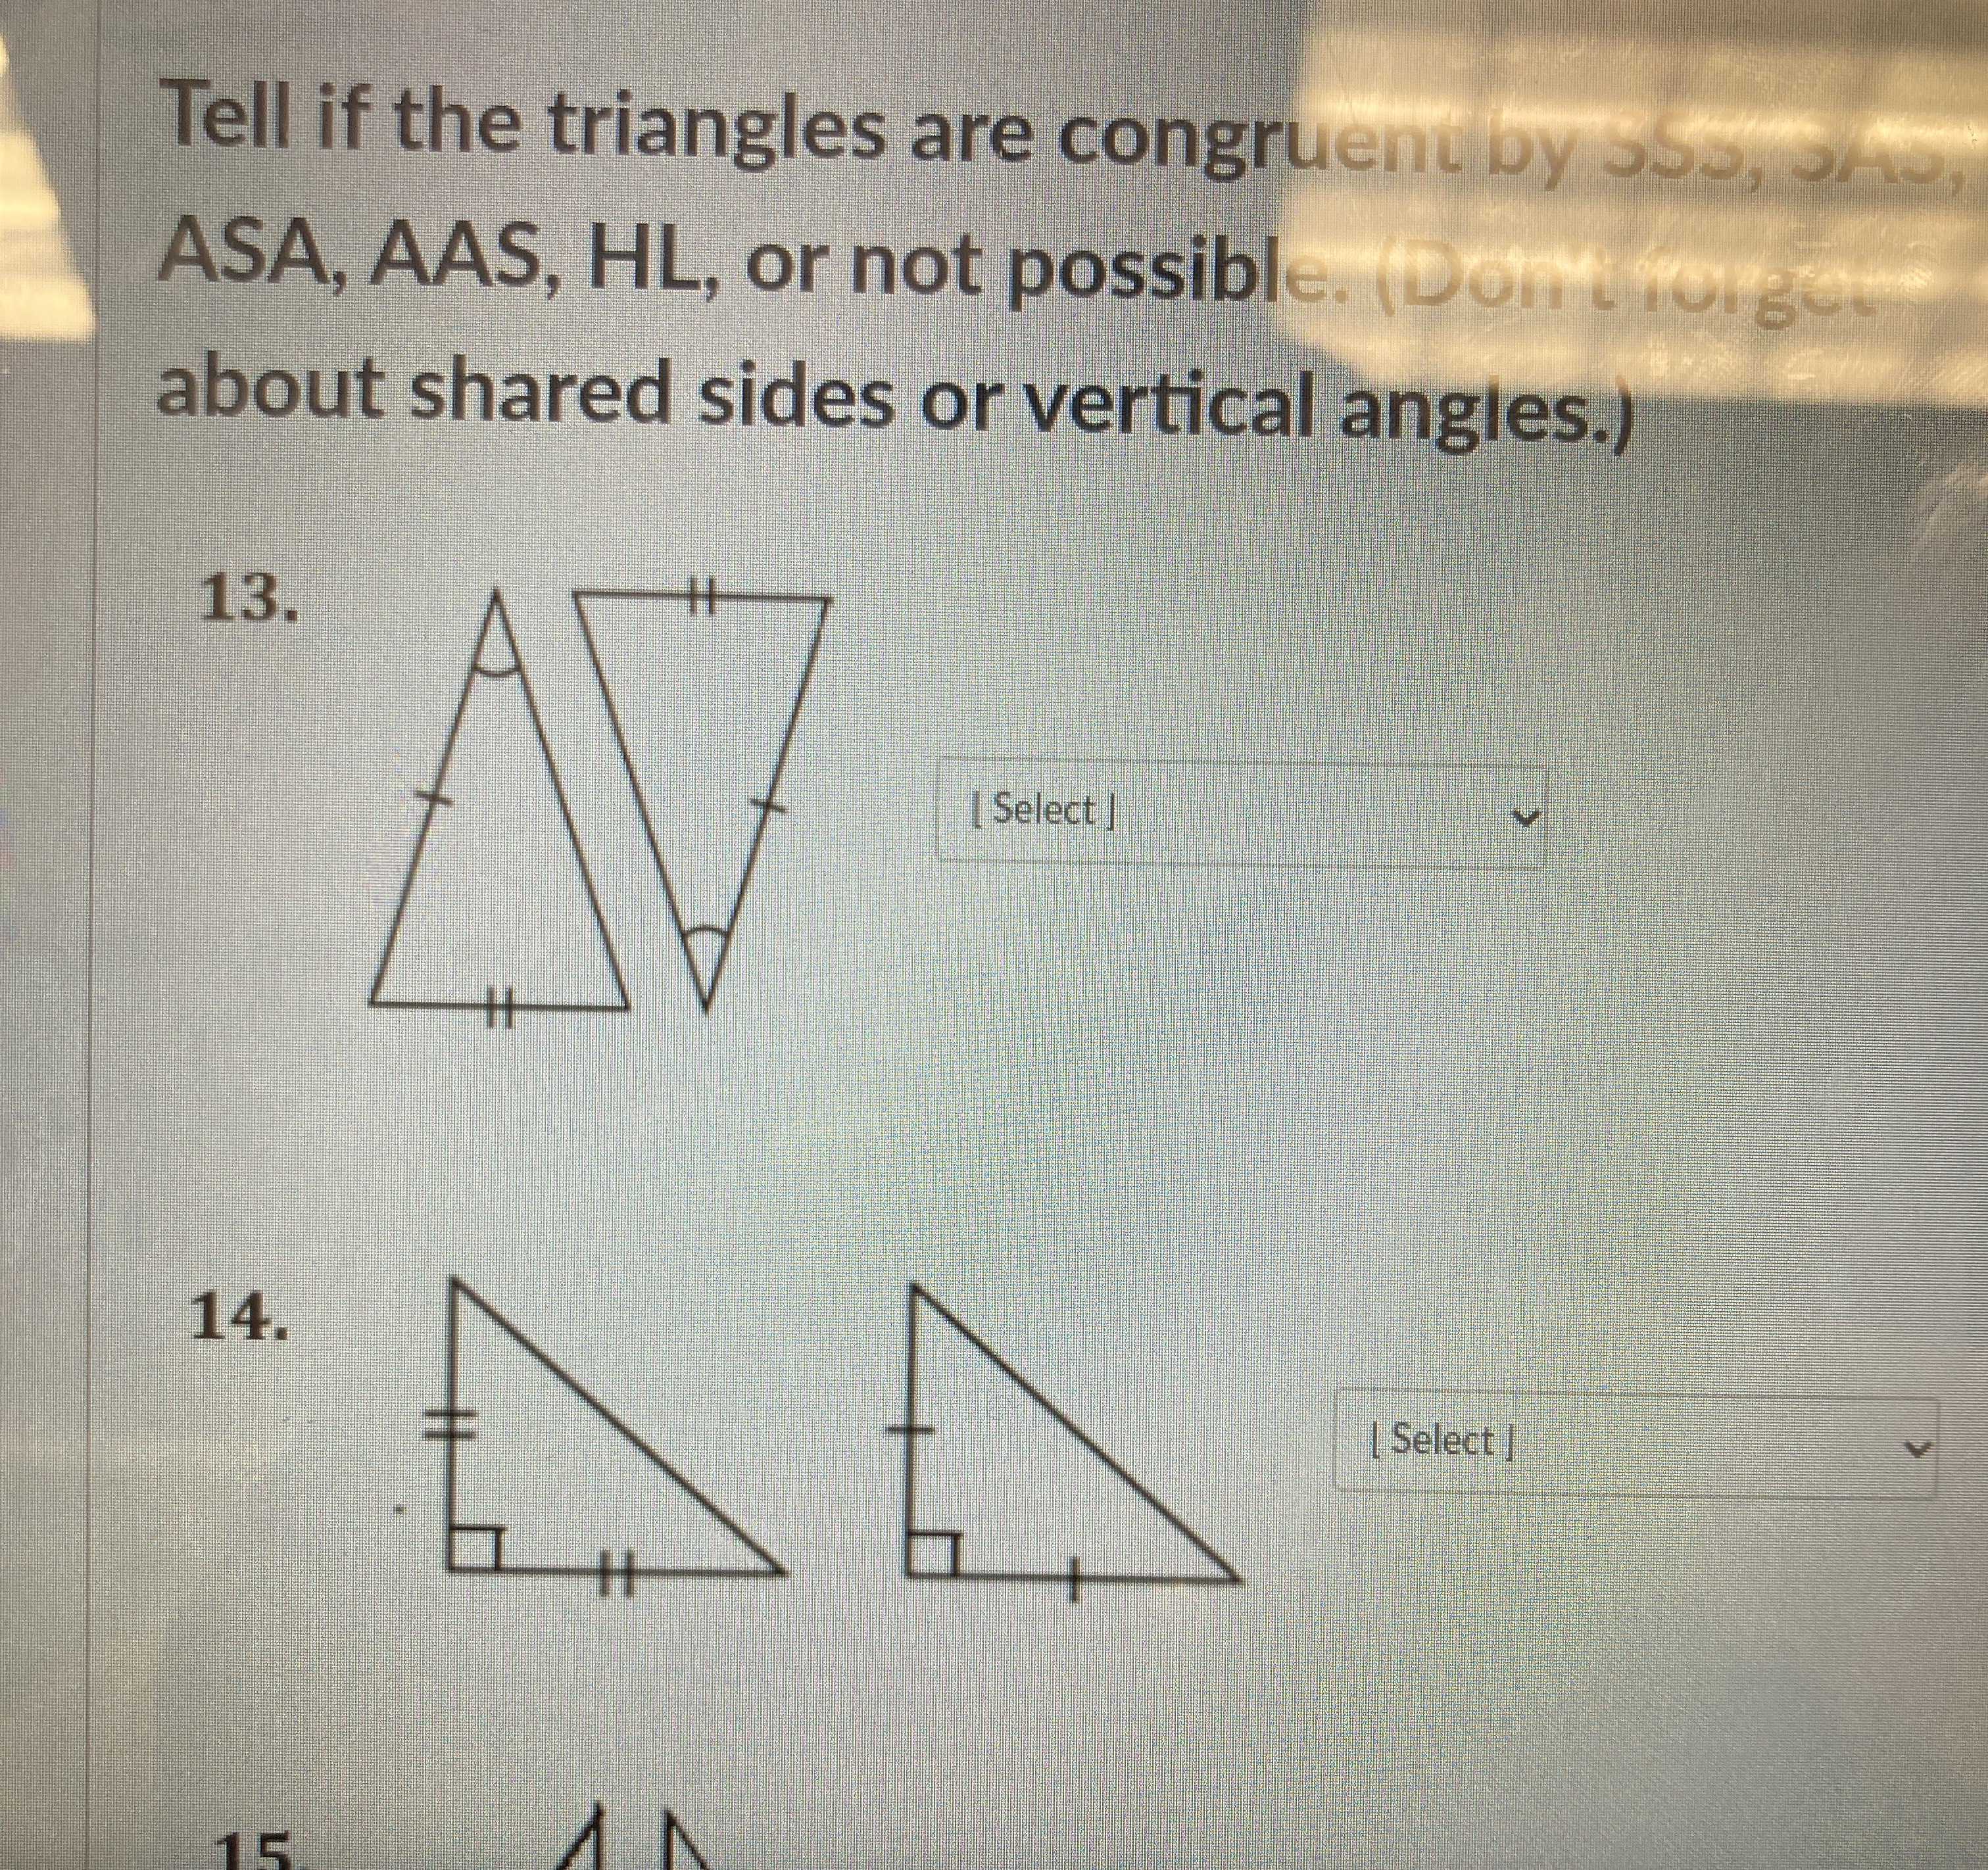 Tell if the triangles are congruent by \( 5 S 5,5,...